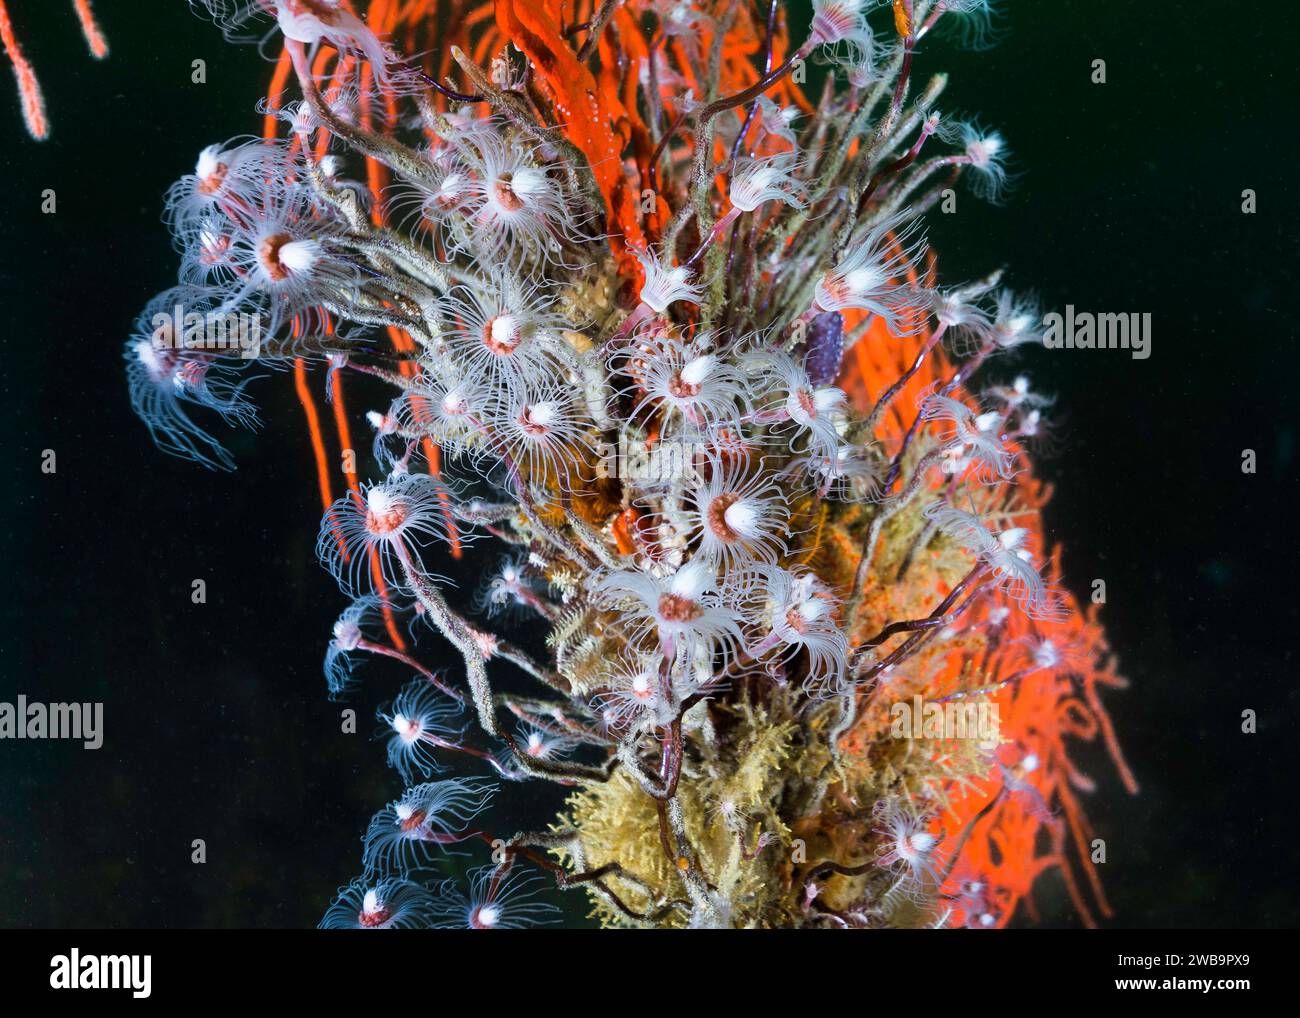 Tubular hydroids (Tubularia warreni) underwater with its pink and white polyps, growing on a sea fan Stock Photo